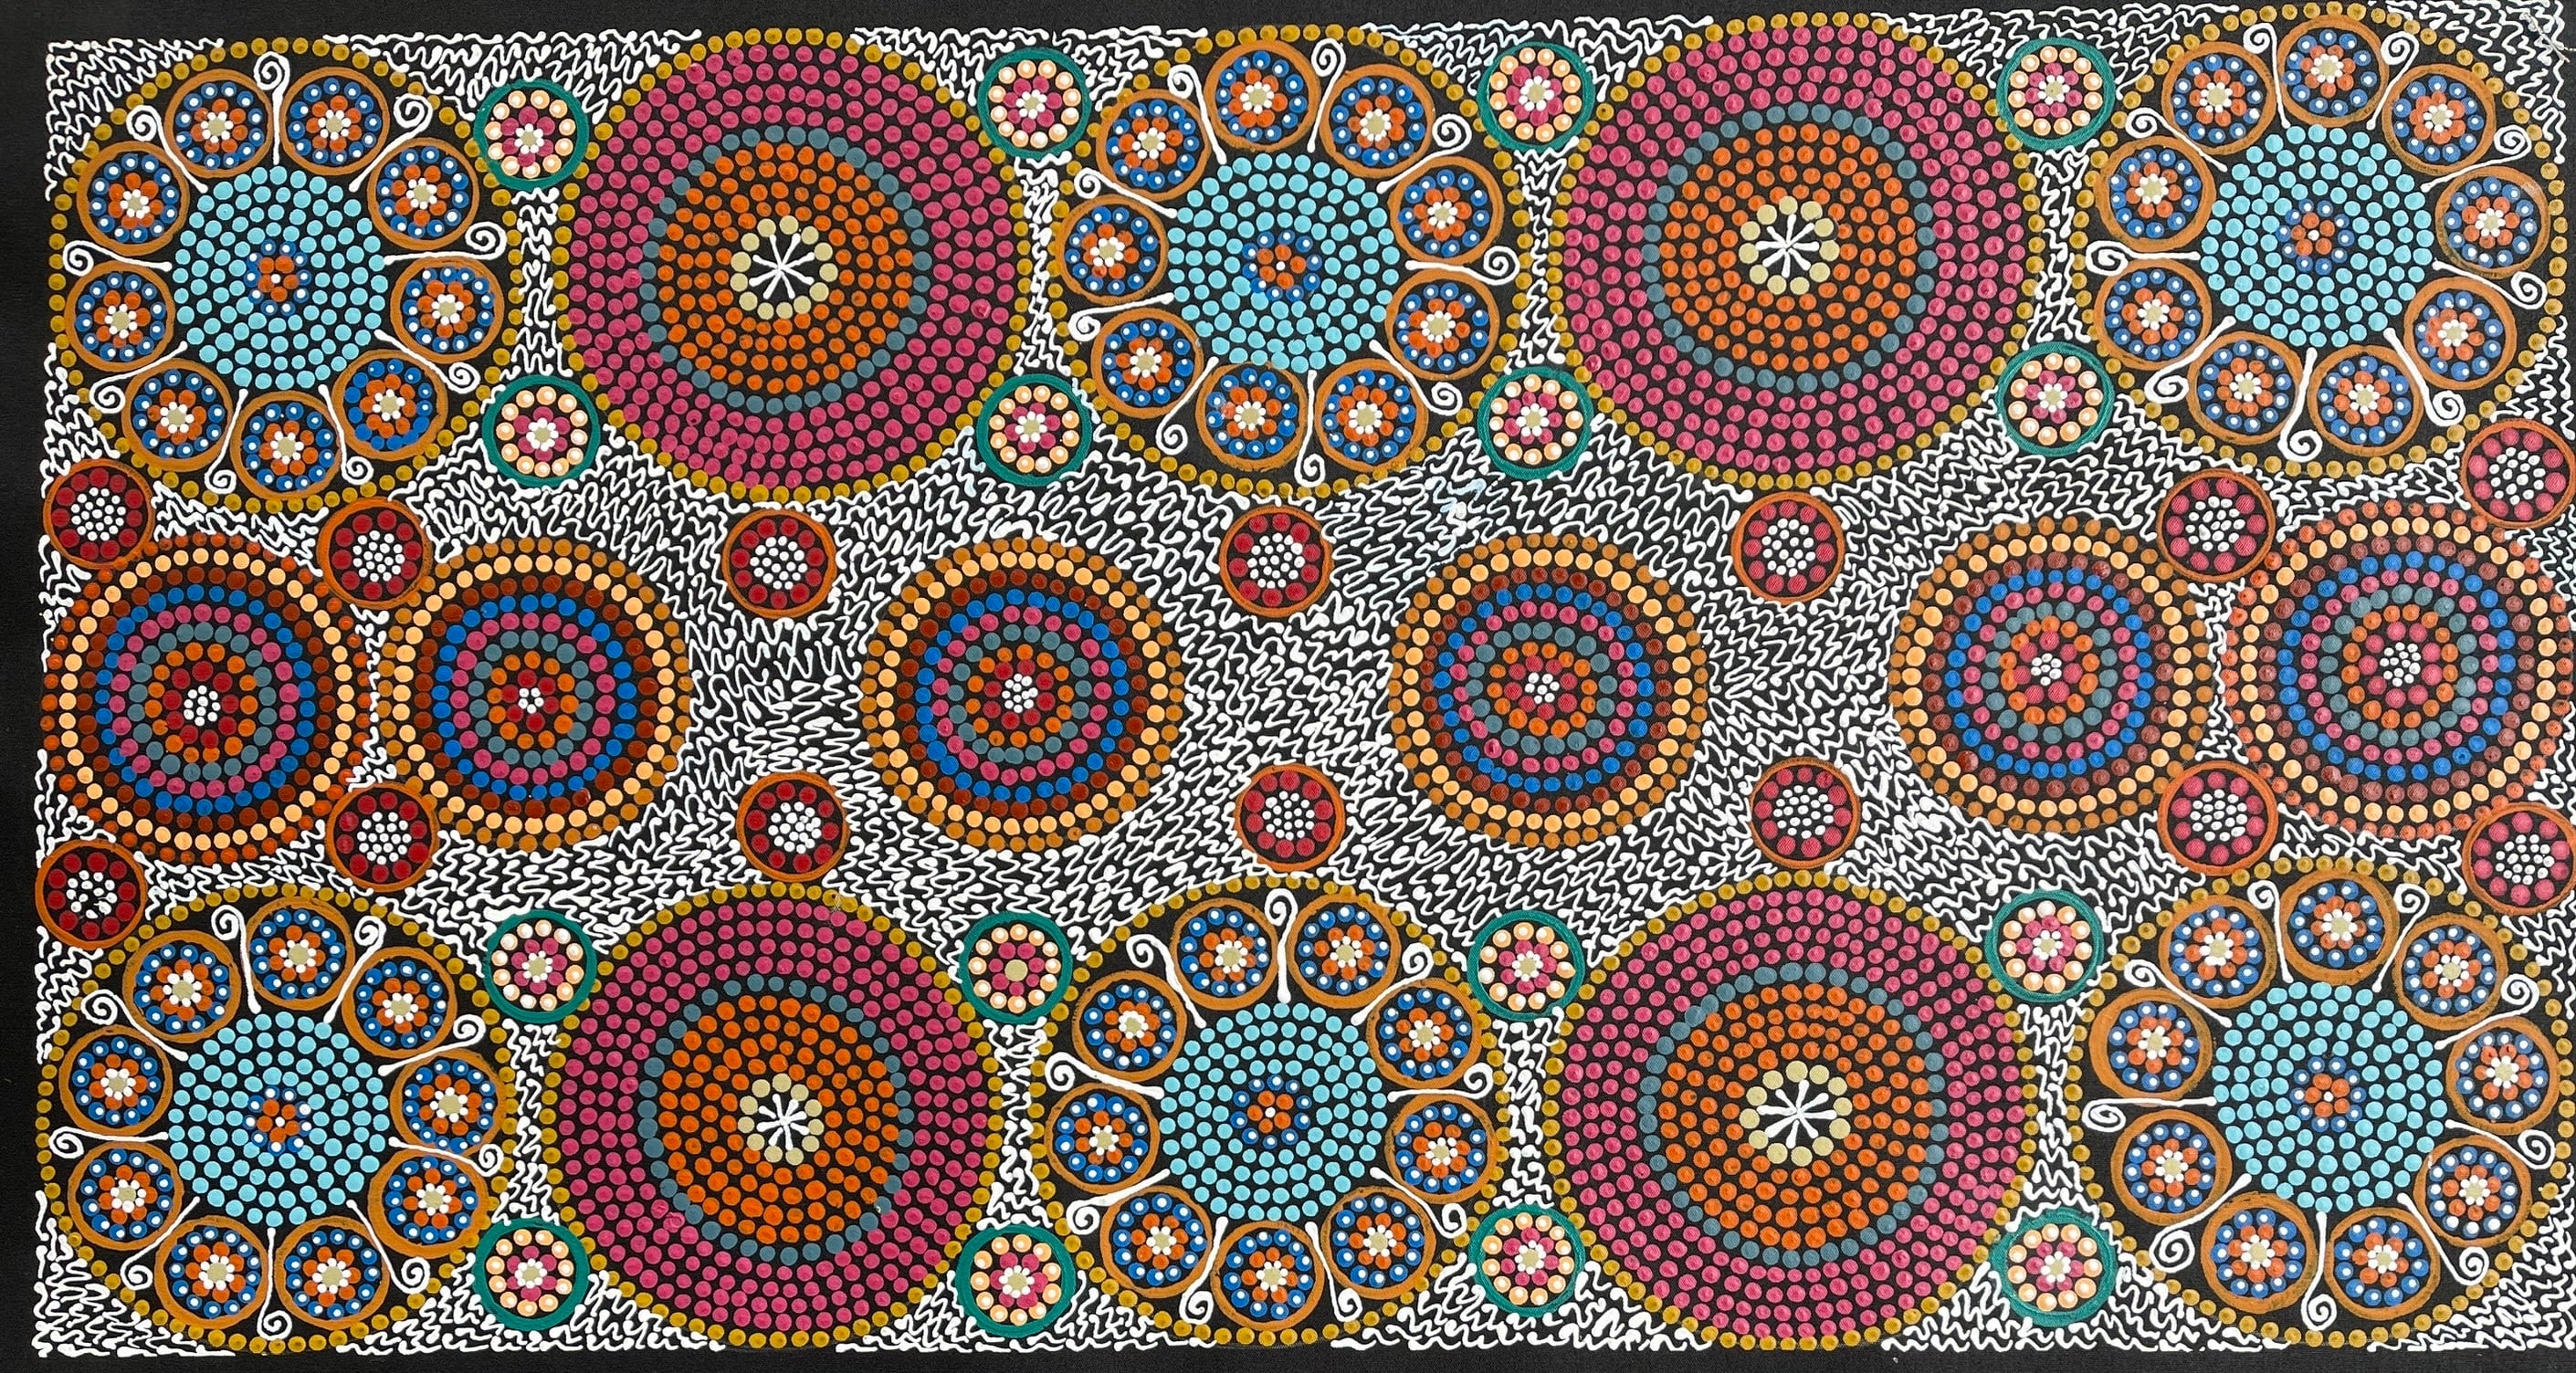 Maryanne Gibson - Bush Tomato, Flower, Berry, Seed, and Onion - 92x49cm .27-4